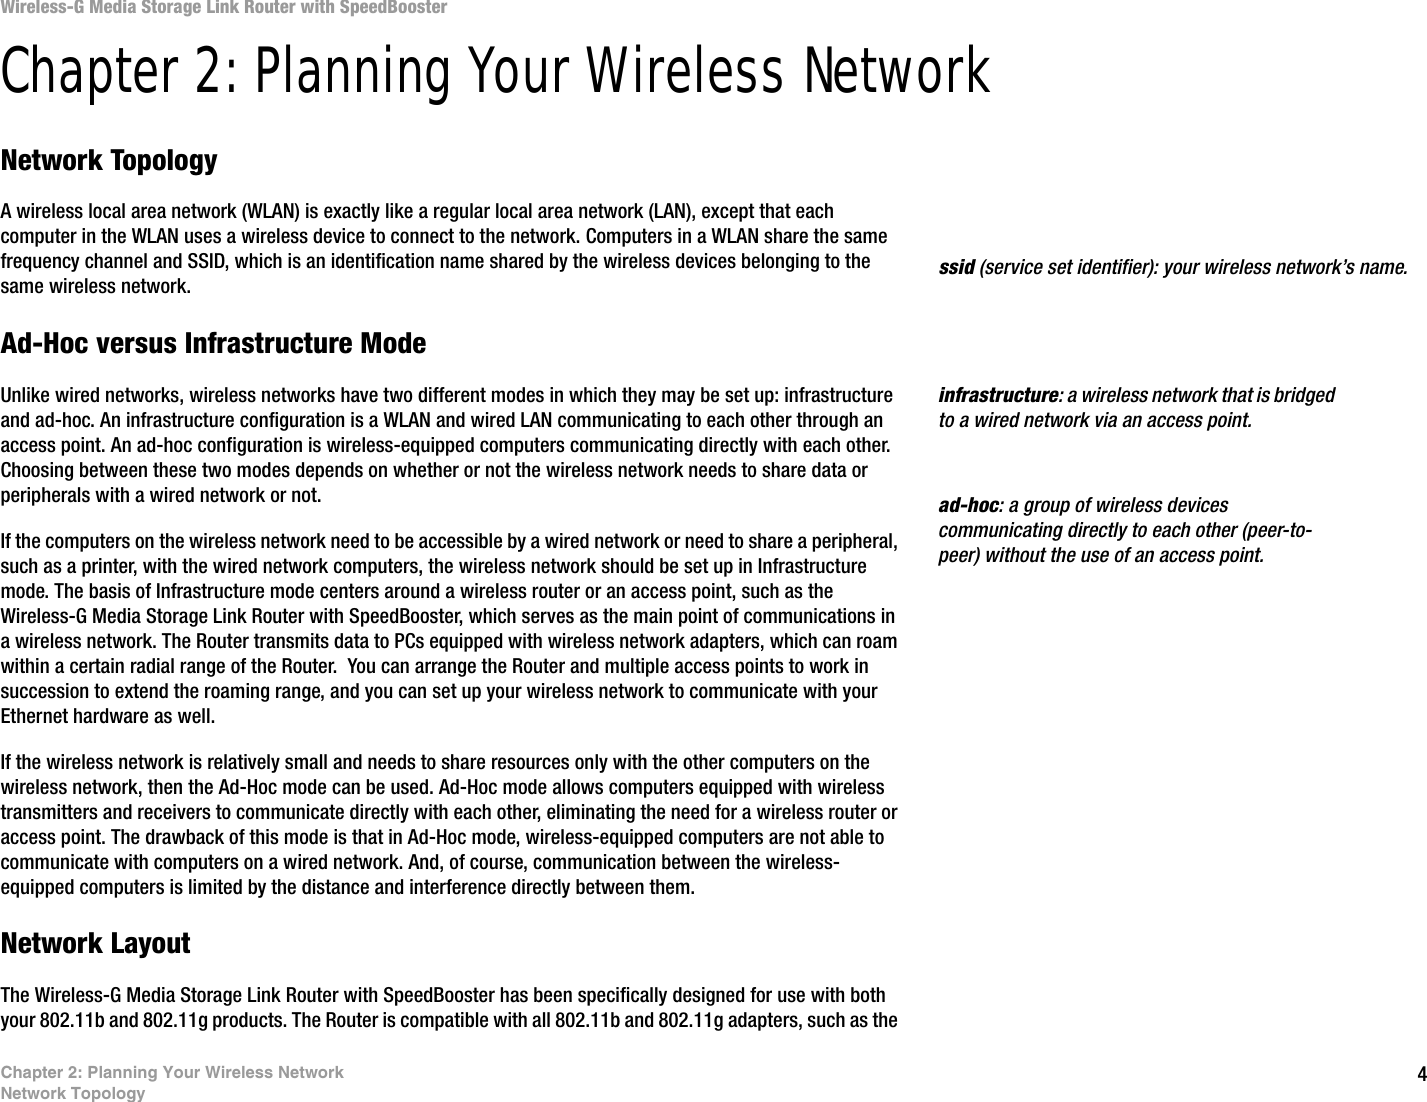 4Chapter 2: Planning Your Wireless NetworkNetwork TopologyWireless-G Media Storage Link Router with SpeedBoosterChapter 2: Planning Your Wireless NetworkNetwork TopologyA wireless local area network (WLAN) is exactly like a regular local area network (LAN), except that each computer in the WLAN uses a wireless device to connect to the network. Computers in a WLAN share the same frequency channel and SSID, which is an identification name shared by the wireless devices belonging to the same wireless network.Ad-Hoc versus Infrastructure ModeUnlike wired networks, wireless networks have two different modes in which they may be set up: infrastructure and ad-hoc. An infrastructure configuration is a WLAN and wired LAN communicating to each other through an access point. An ad-hoc configuration is wireless-equipped computers communicating directly with each other. Choosing between these two modes depends on whether or not the wireless network needs to share data or peripherals with a wired network or not. If the computers on the wireless network need to be accessible by a wired network or need to share a peripheral, such as a printer, with the wired network computers, the wireless network should be set up in Infrastructure mode. The basis of Infrastructure mode centers around a wireless router or an access point, such as the Wireless-G Media Storage Link Router with SpeedBooster, which serves as the main point of communications in a wireless network. The Router transmits data to PCs equipped with wireless network adapters, which can roam within a certain radial range of the Router.  You can arrange the Router and multiple access points to work in succession to extend the roaming range, and you can set up your wireless network to communicate with your Ethernet hardware as well. If the wireless network is relatively small and needs to share resources only with the other computers on the wireless network, then the Ad-Hoc mode can be used. Ad-Hoc mode allows computers equipped with wireless transmitters and receivers to communicate directly with each other, eliminating the need for a wireless router or access point. The drawback of this mode is that in Ad-Hoc mode, wireless-equipped computers are not able to communicate with computers on a wired network. And, of course, communication between the wireless-equipped computers is limited by the distance and interference directly between them. Network LayoutThe Wireless-G Media Storage Link Router with SpeedBooster has been specifically designed for use with both your 802.11b and 802.11g products. The Router is compatible with all 802.11b and 802.11g adapters, such as the infrastructure: a wireless network that is bridged to a wired network via an access point.ssid (service set identifier): your wireless network’s name.ad-hoc: a group of wireless devices communicating directly to each other (peer-to-peer) without the use of an access point.